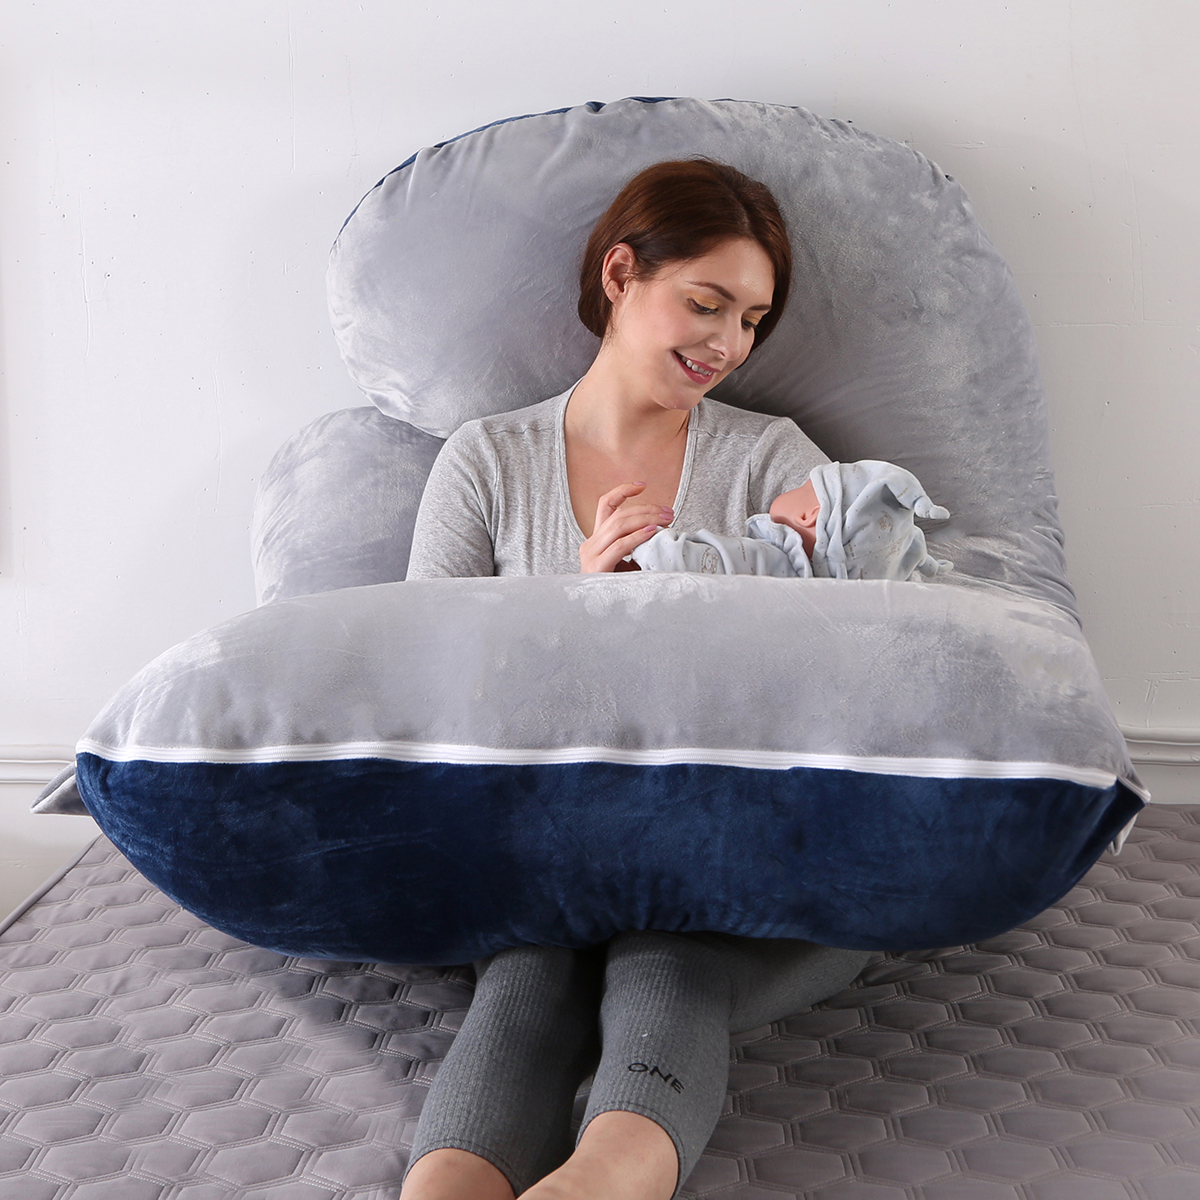 Upgrade Pregnancy Pillow 57In J-Shape Full Body Support Maternity Pillow w/Cover 